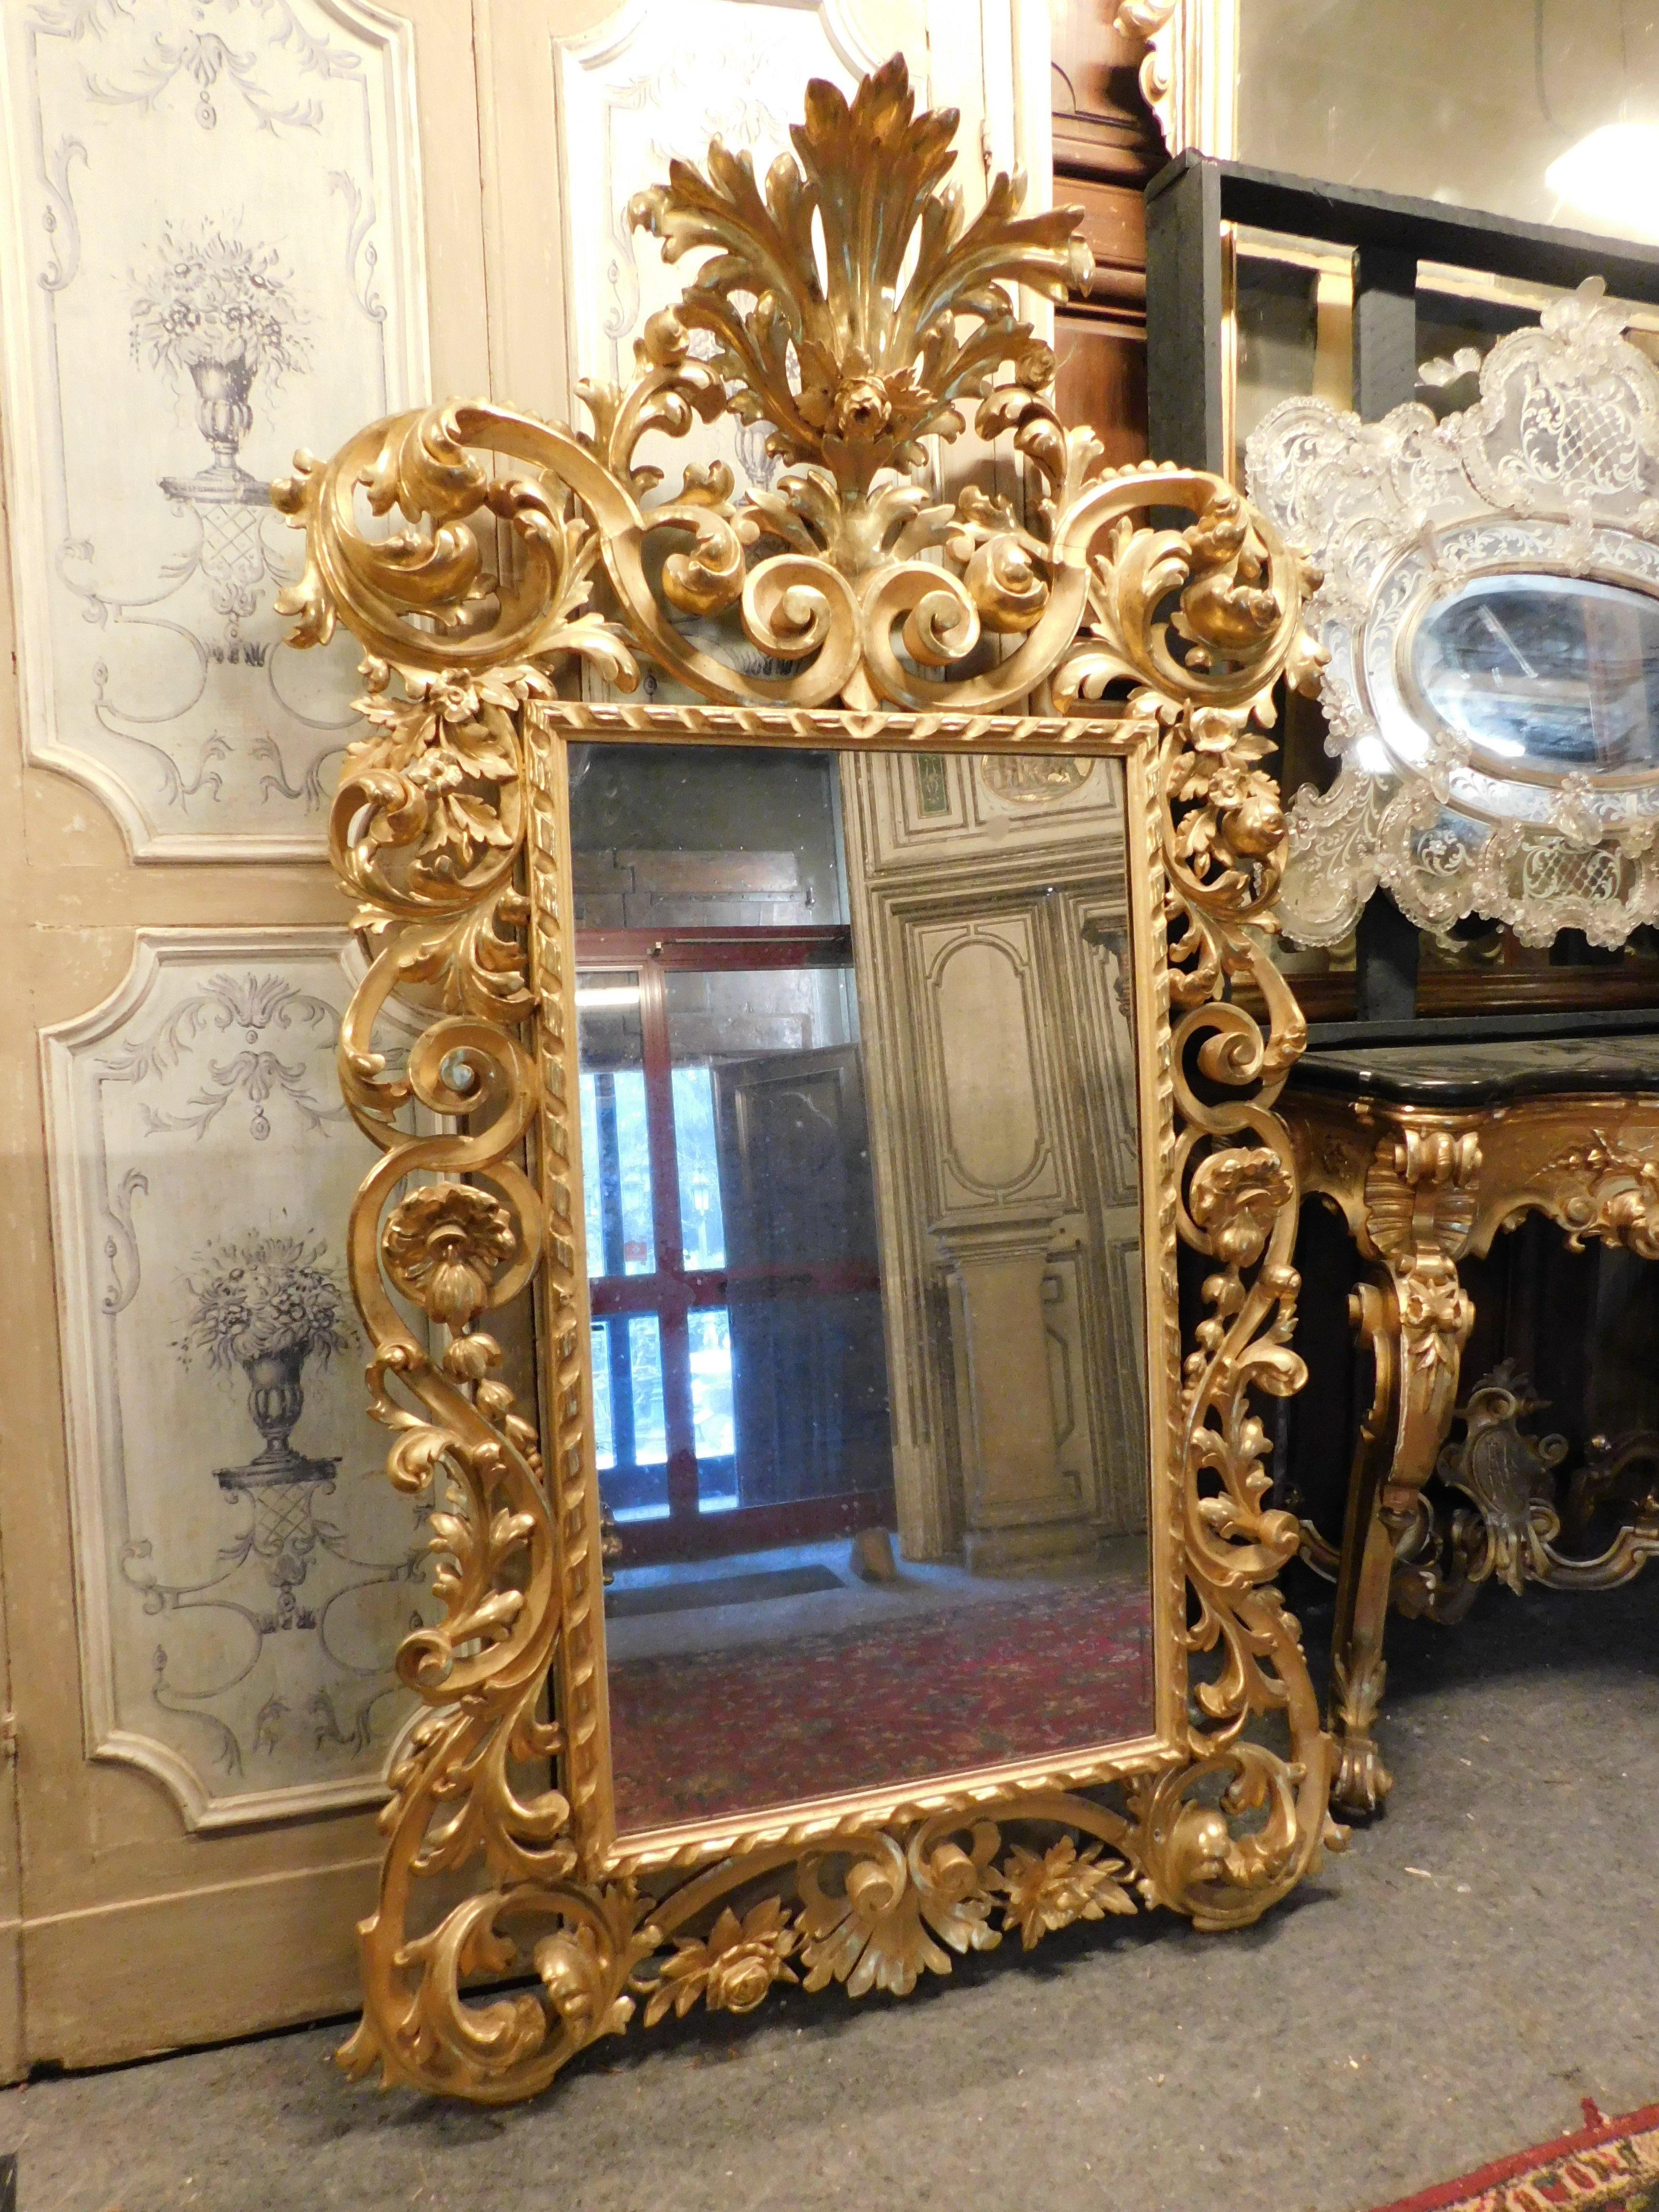 Ancient mirror in gilded wood, rich handmade fretwork decoration, with volutes and floral and leafy elements, large carved crown. Period 1800s, from southern Italy (Naples). Furnishing element of great charm and scenic presence. To enrich entrances